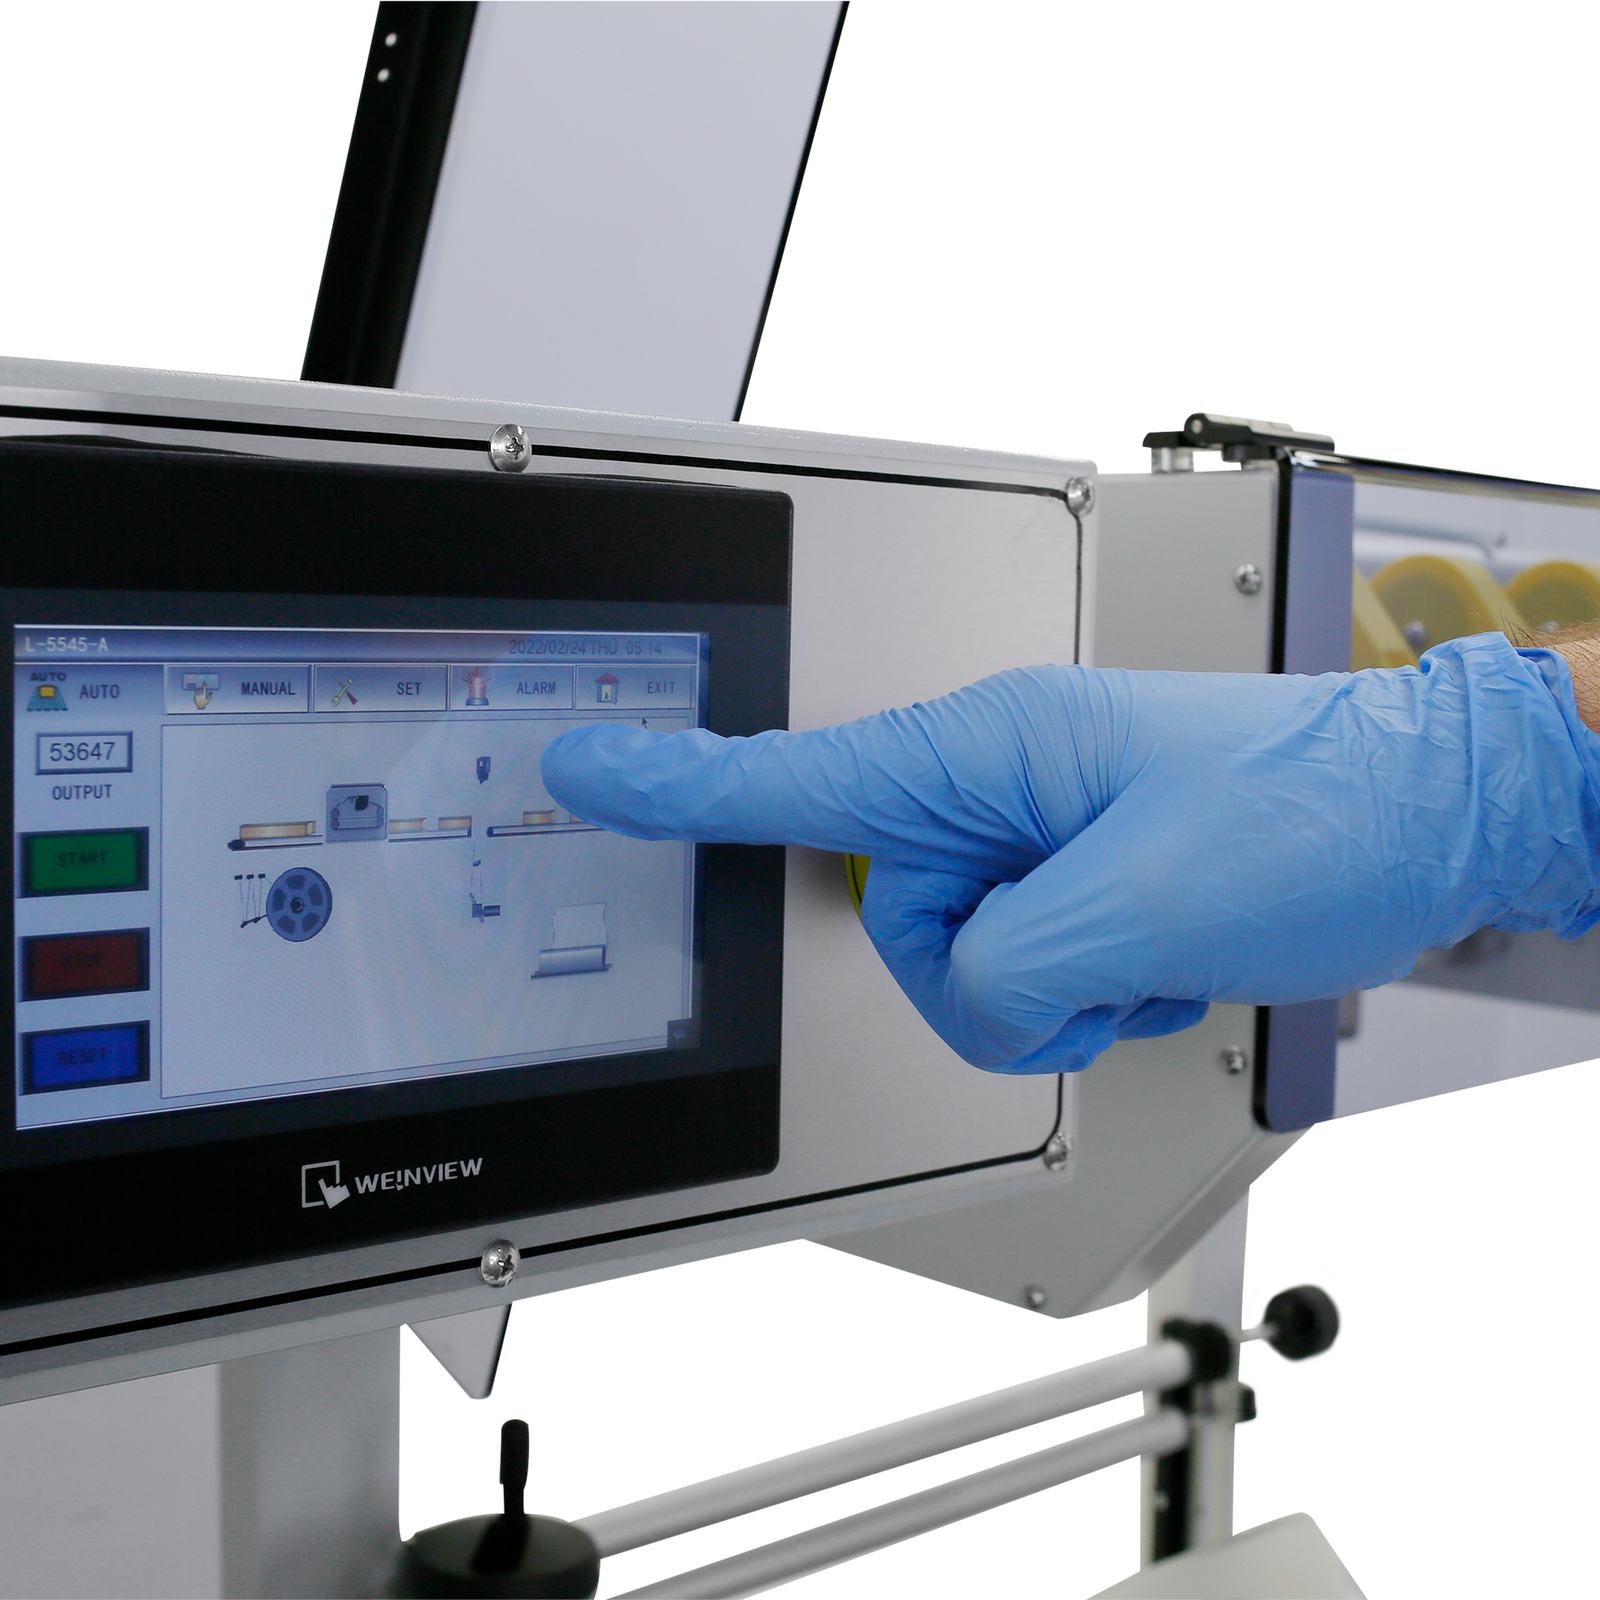 Hand of a person touching the touchscreen panel of the JORES TECHNOLOGIES® Automatic L Bar Film Sealer to set it before stating production.